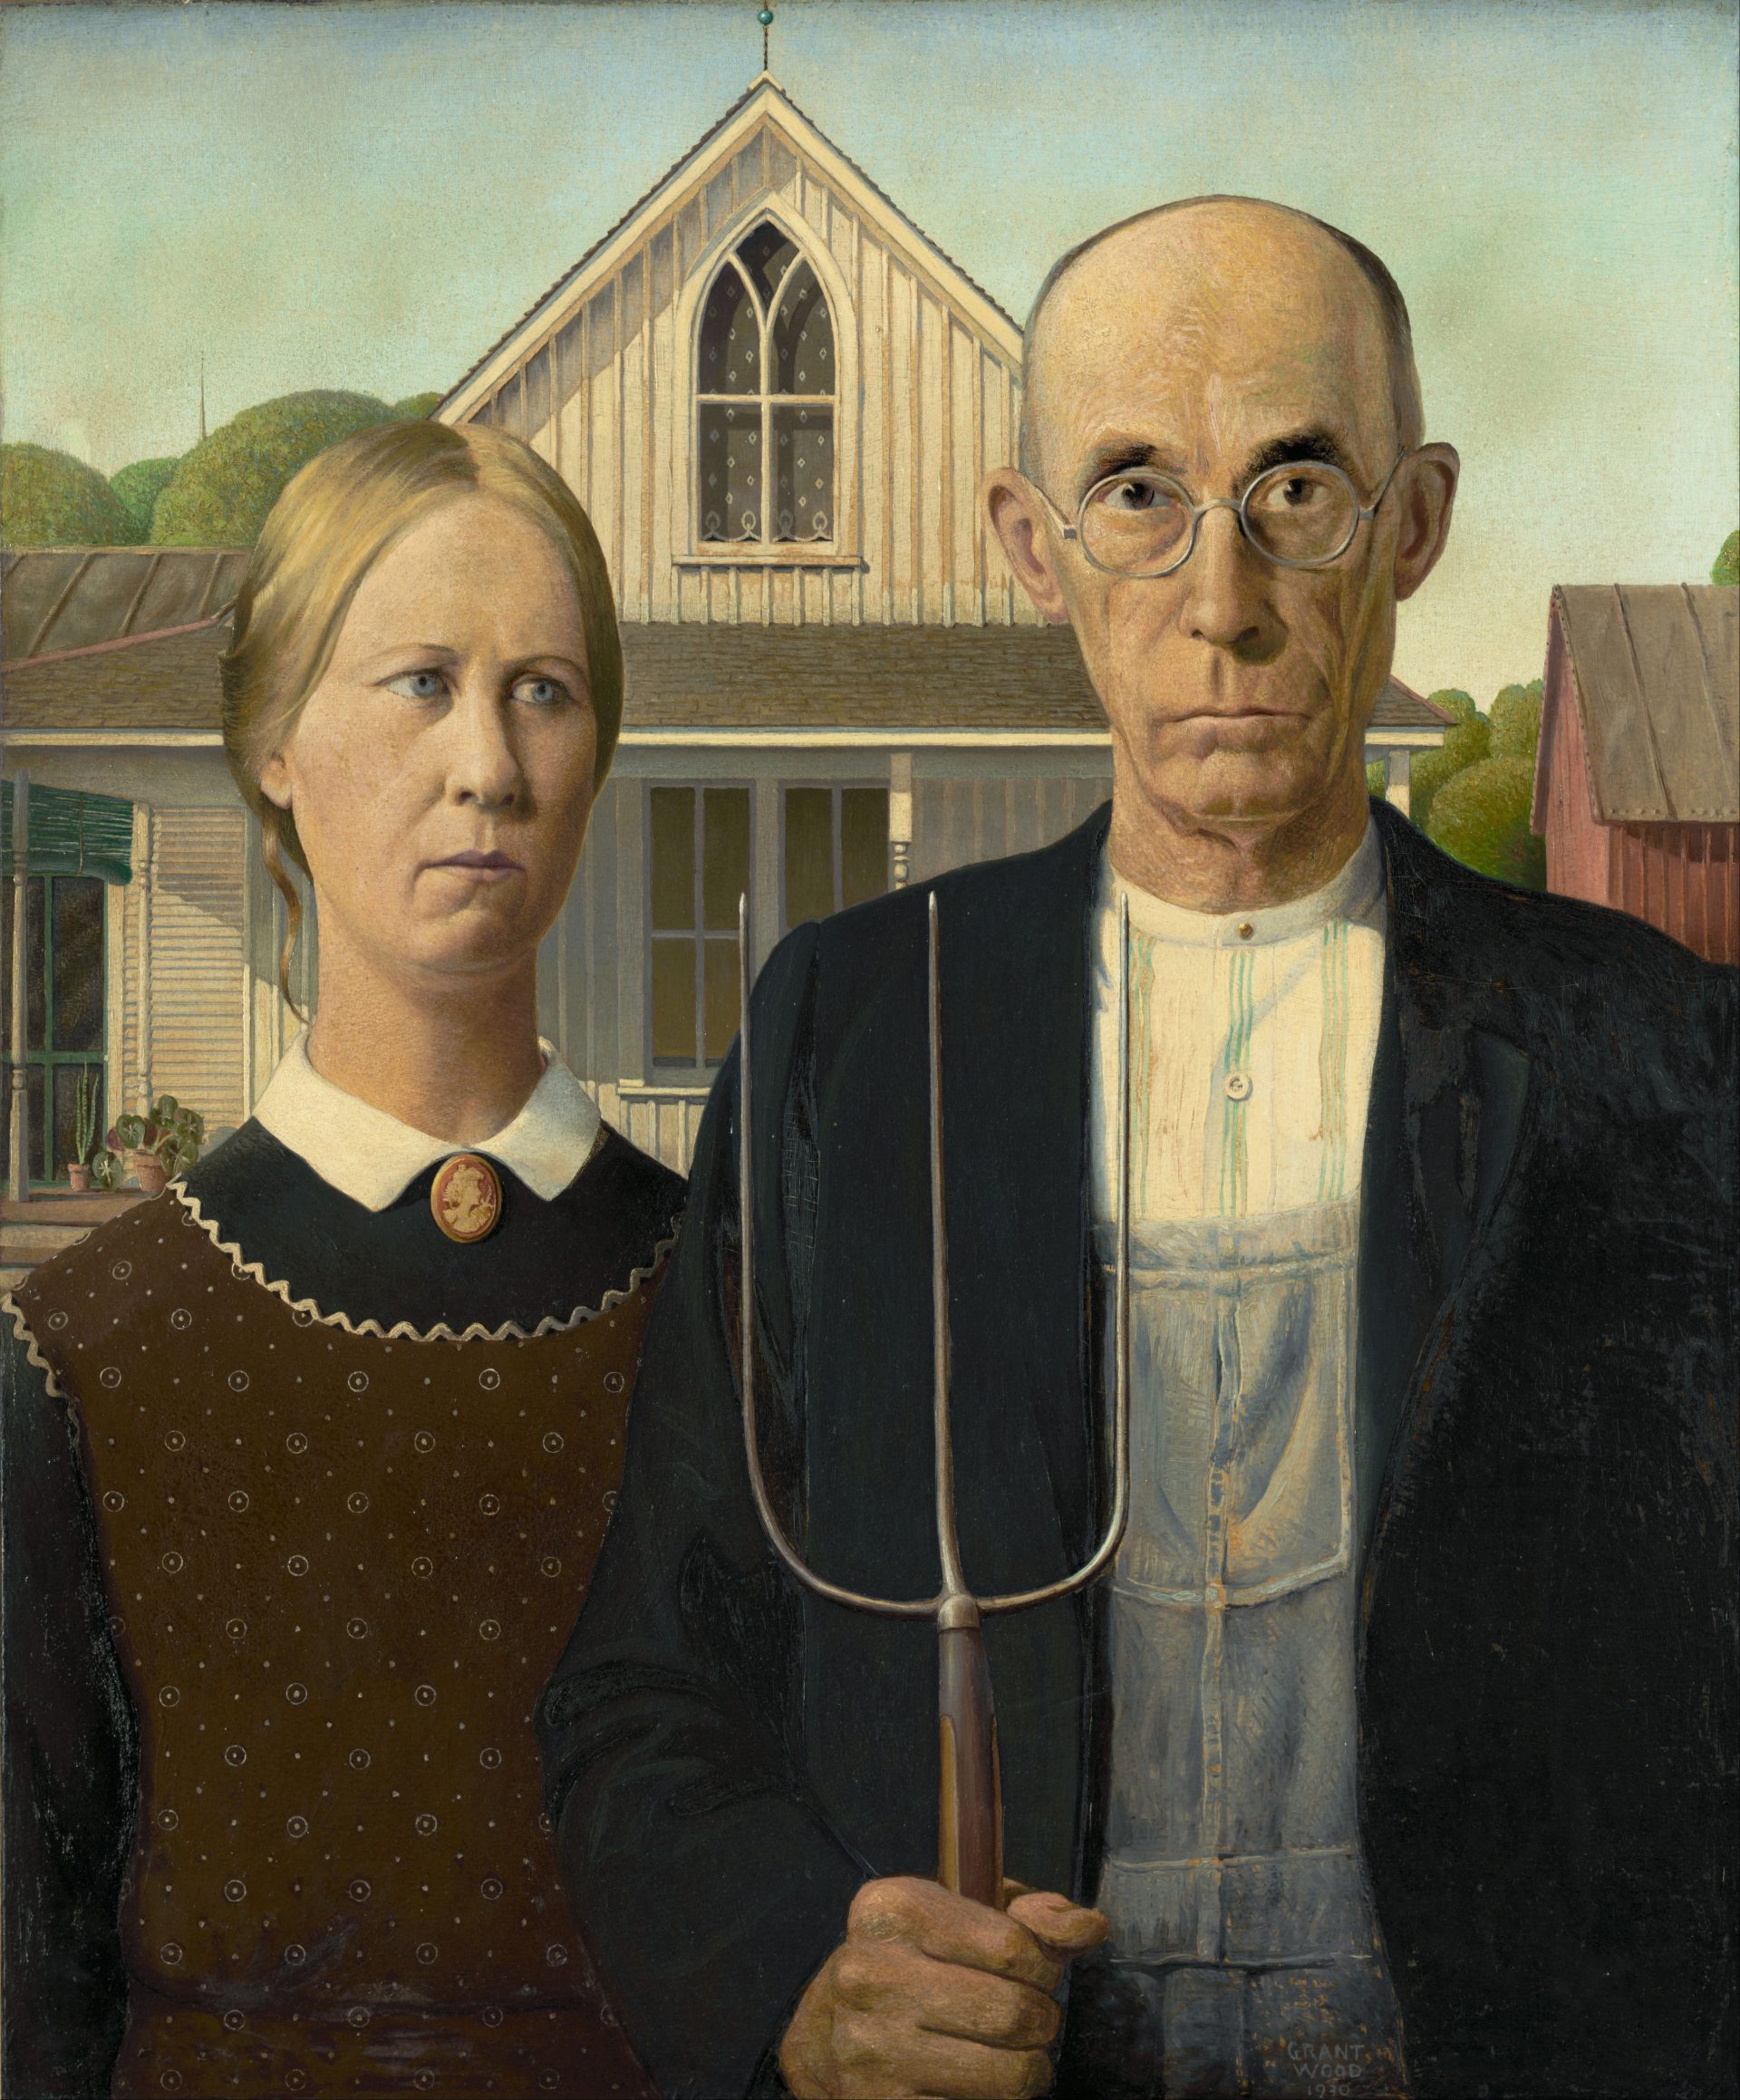 A stern-looking, middle-aged man stands on the right, dressed in overalls with a black jacket. He holds a long-handled pitchfork vertically, the prongs pointing upwards. Next to him on the left, a woman, presumed to be his daughter, wears a colonial print apron covering a dark dress, her eyes slightly averted to the right. Both figures embody the rural Midwest ethos of the time. Behind them, a white farmhouse with a distinctive Gothic window stands under a clear, bright sky, creating a stark contrast to the solemn expressions of the figures. The overall tone of the painting suggests a mix of resilience, austerity, and the American spirit in rural life.